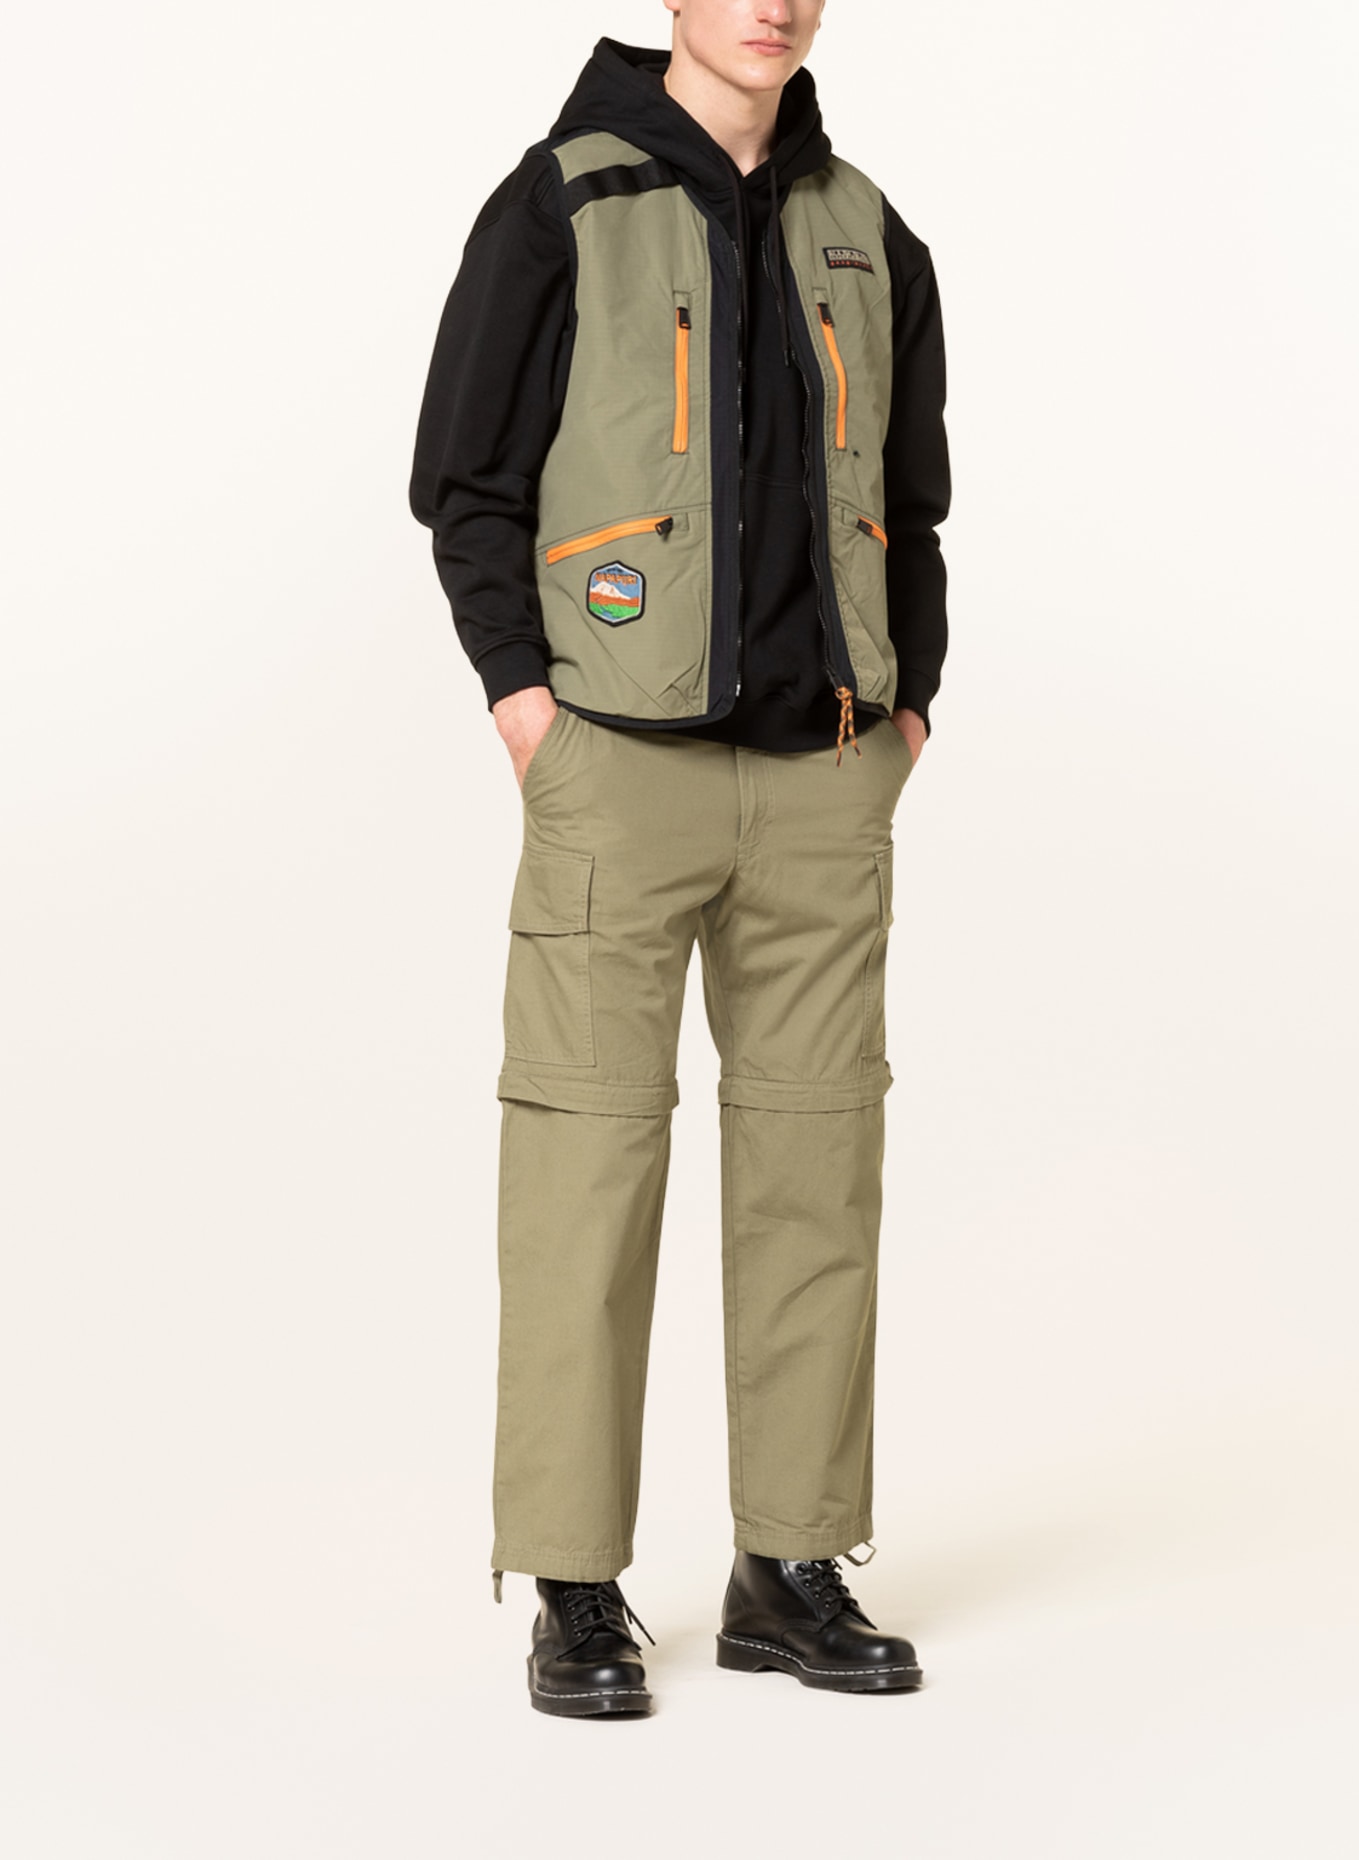 Mens Convertible Hiking Pants Quick Dry, Lightweight, Zip Off Army Fatigue  Shorts For Outdoor Activities, Fishing, Travel, Safari, And Cargo From  Htzyhstore, $30.83 | DHgate.Com